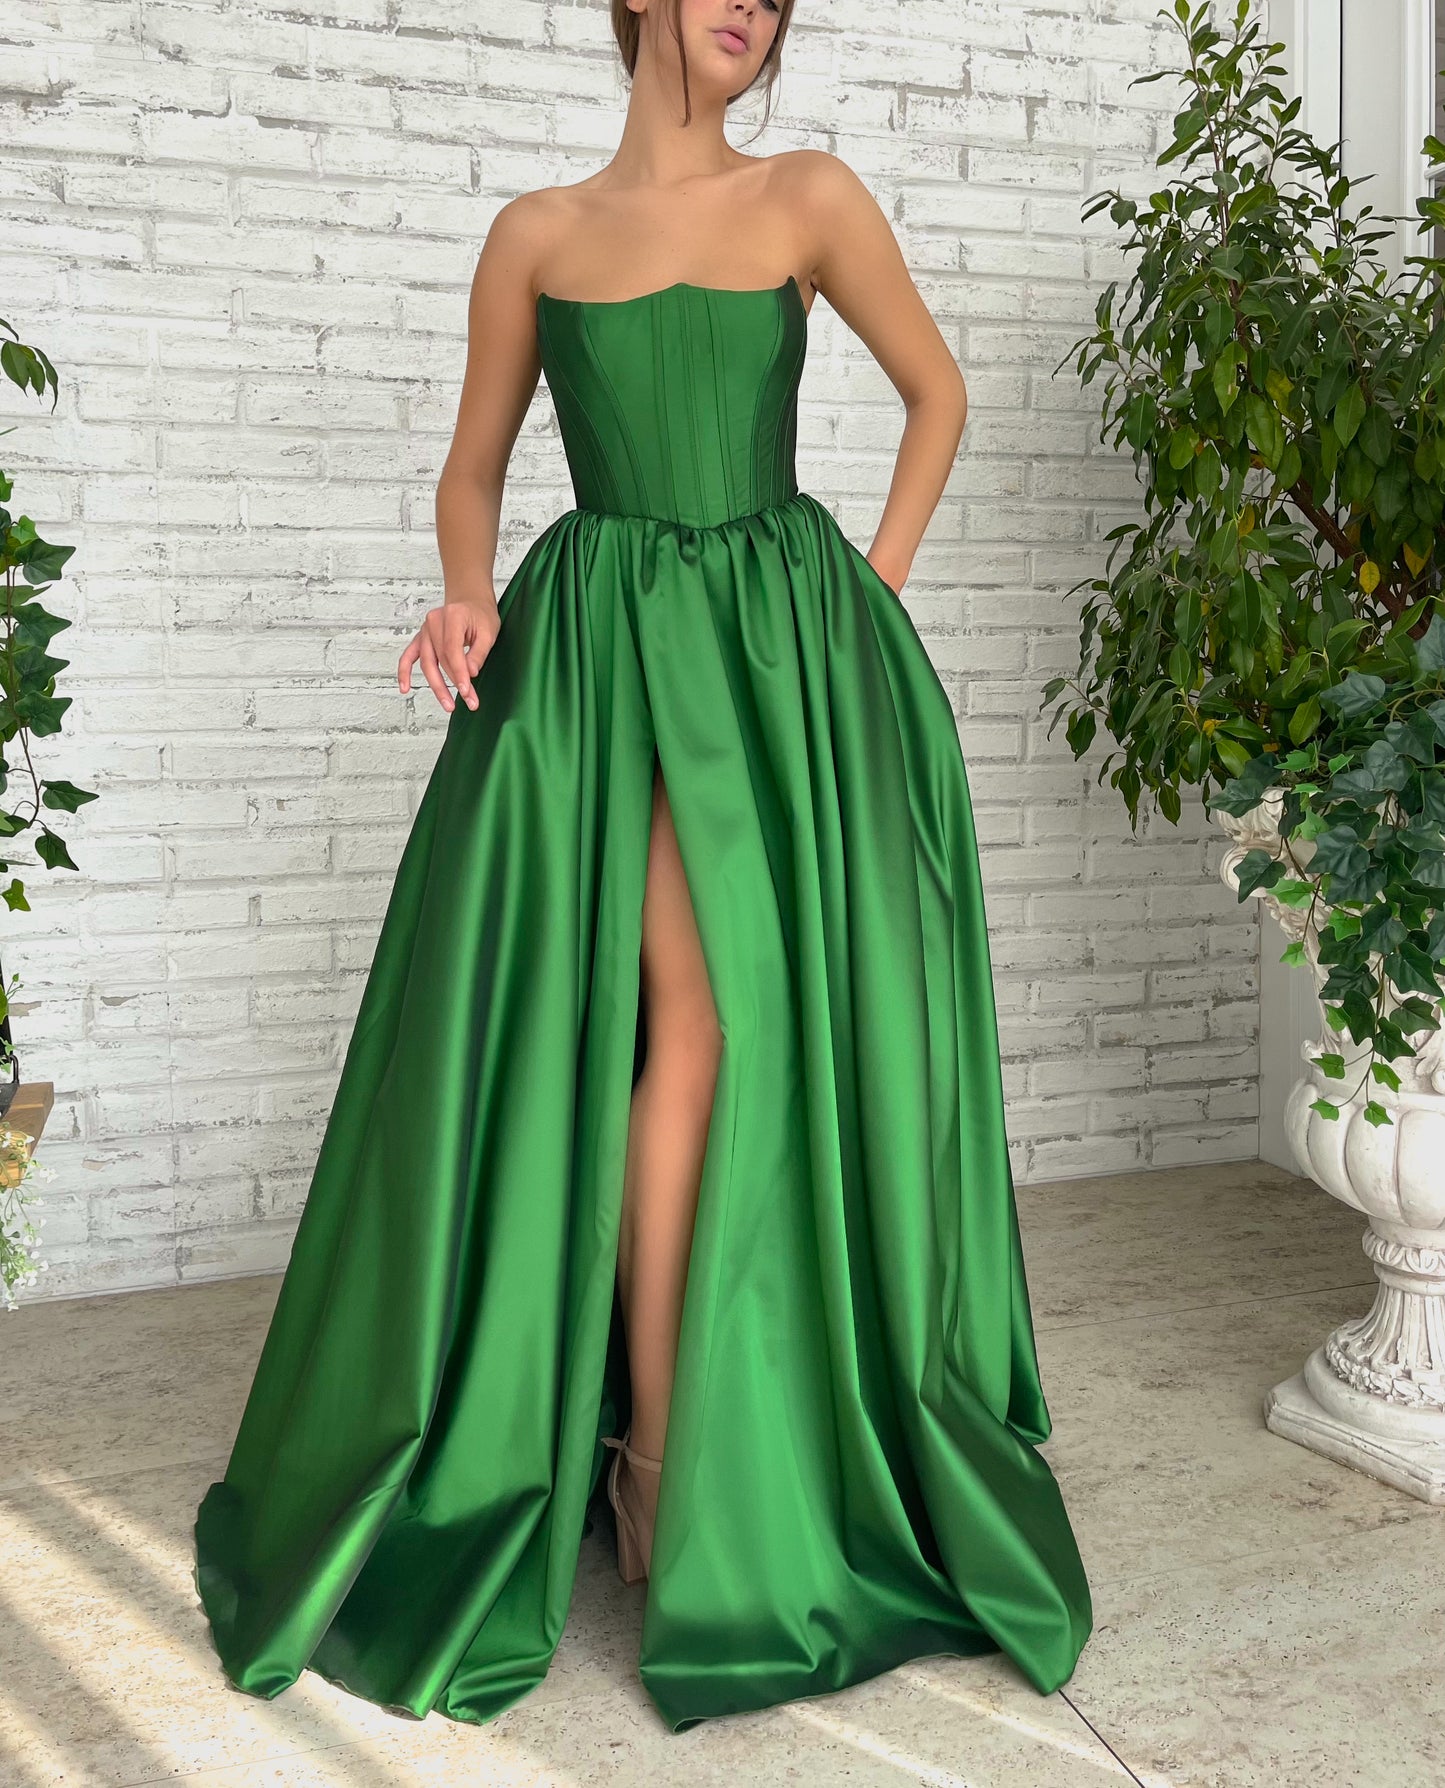 Green A-Line dress with no sleeves